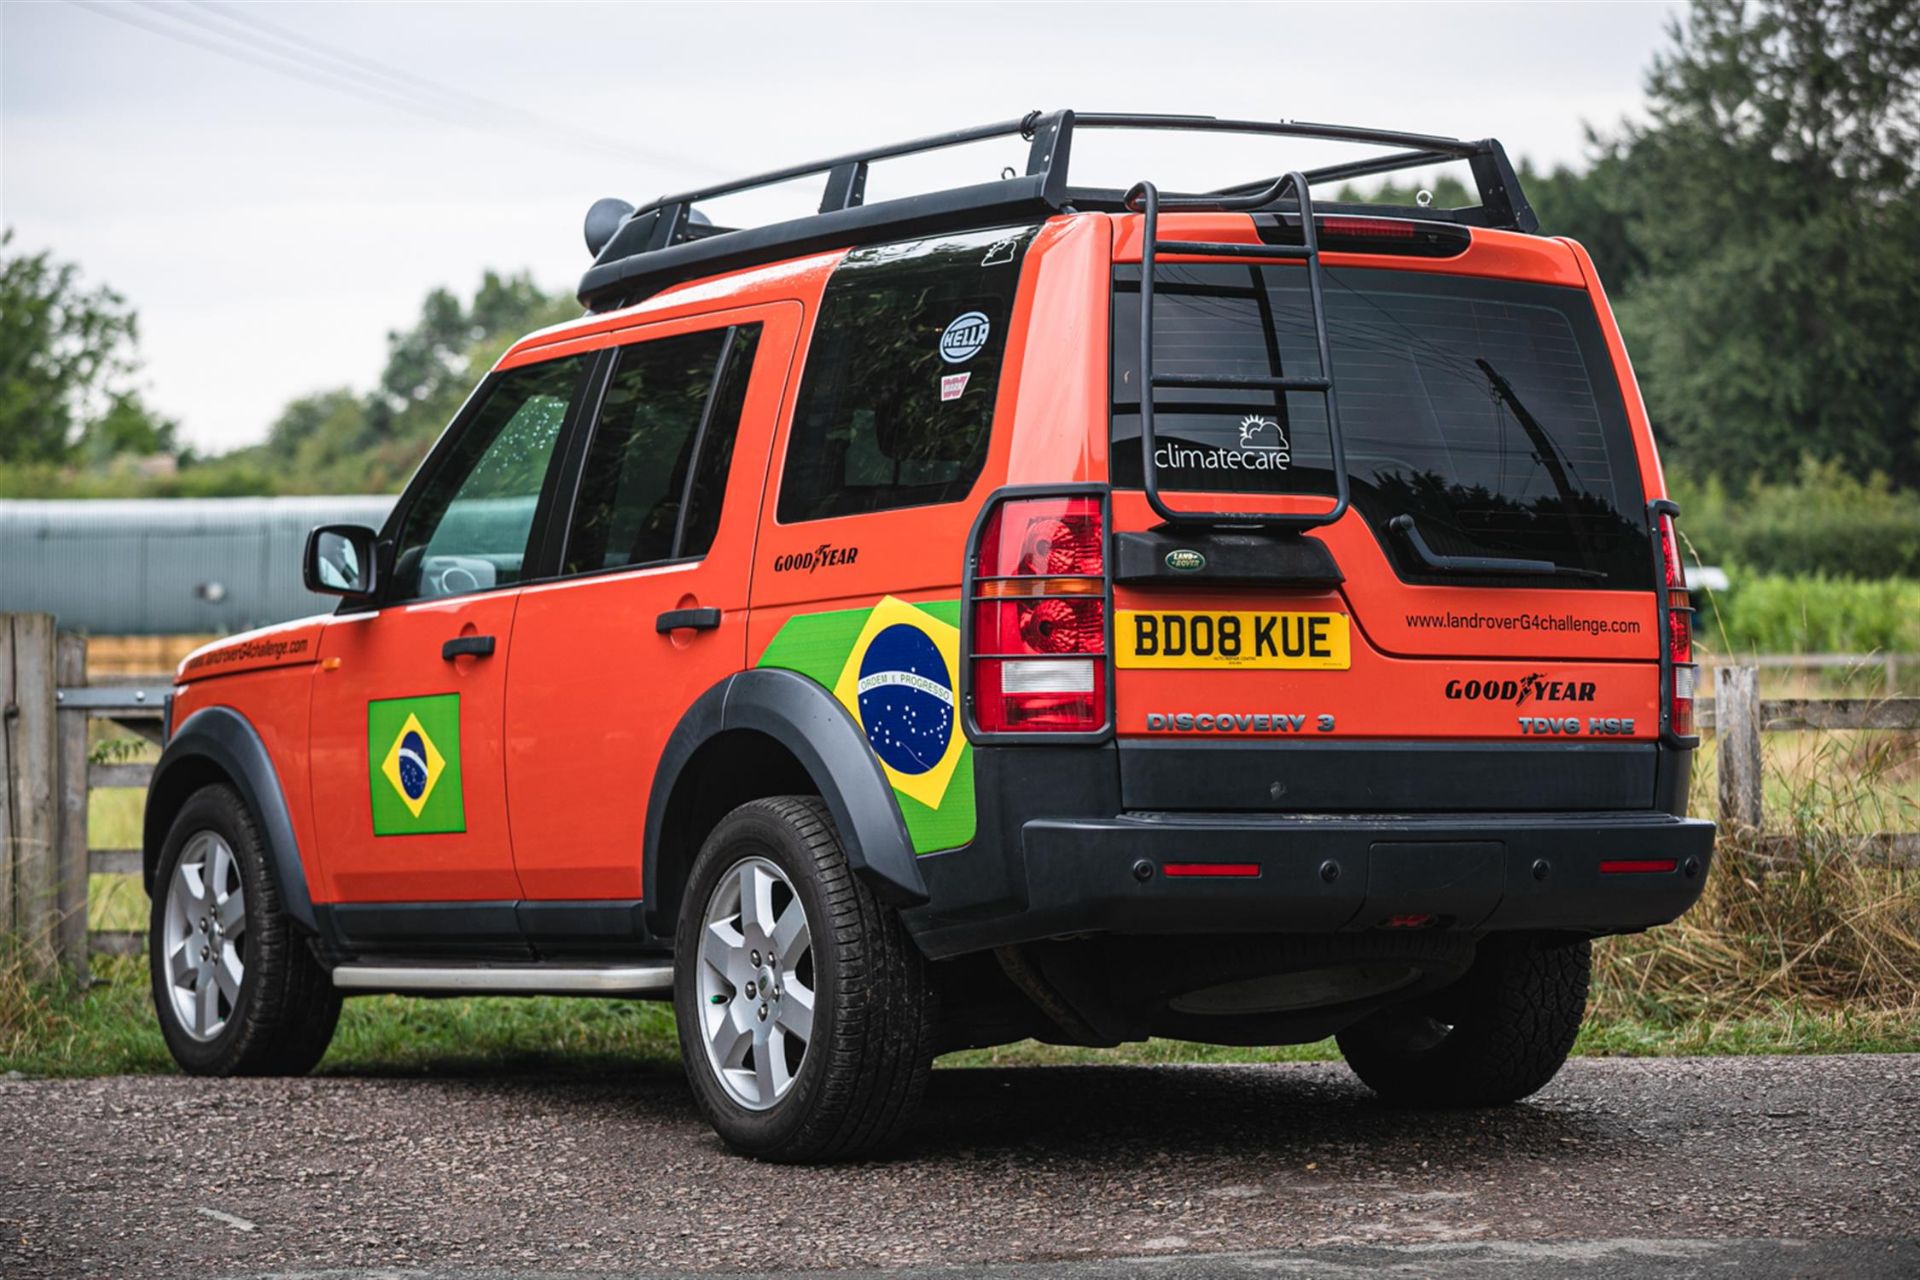 2008 Land Rover Discovery TDV6 HSE G4 Challenge - Image 2 of 10